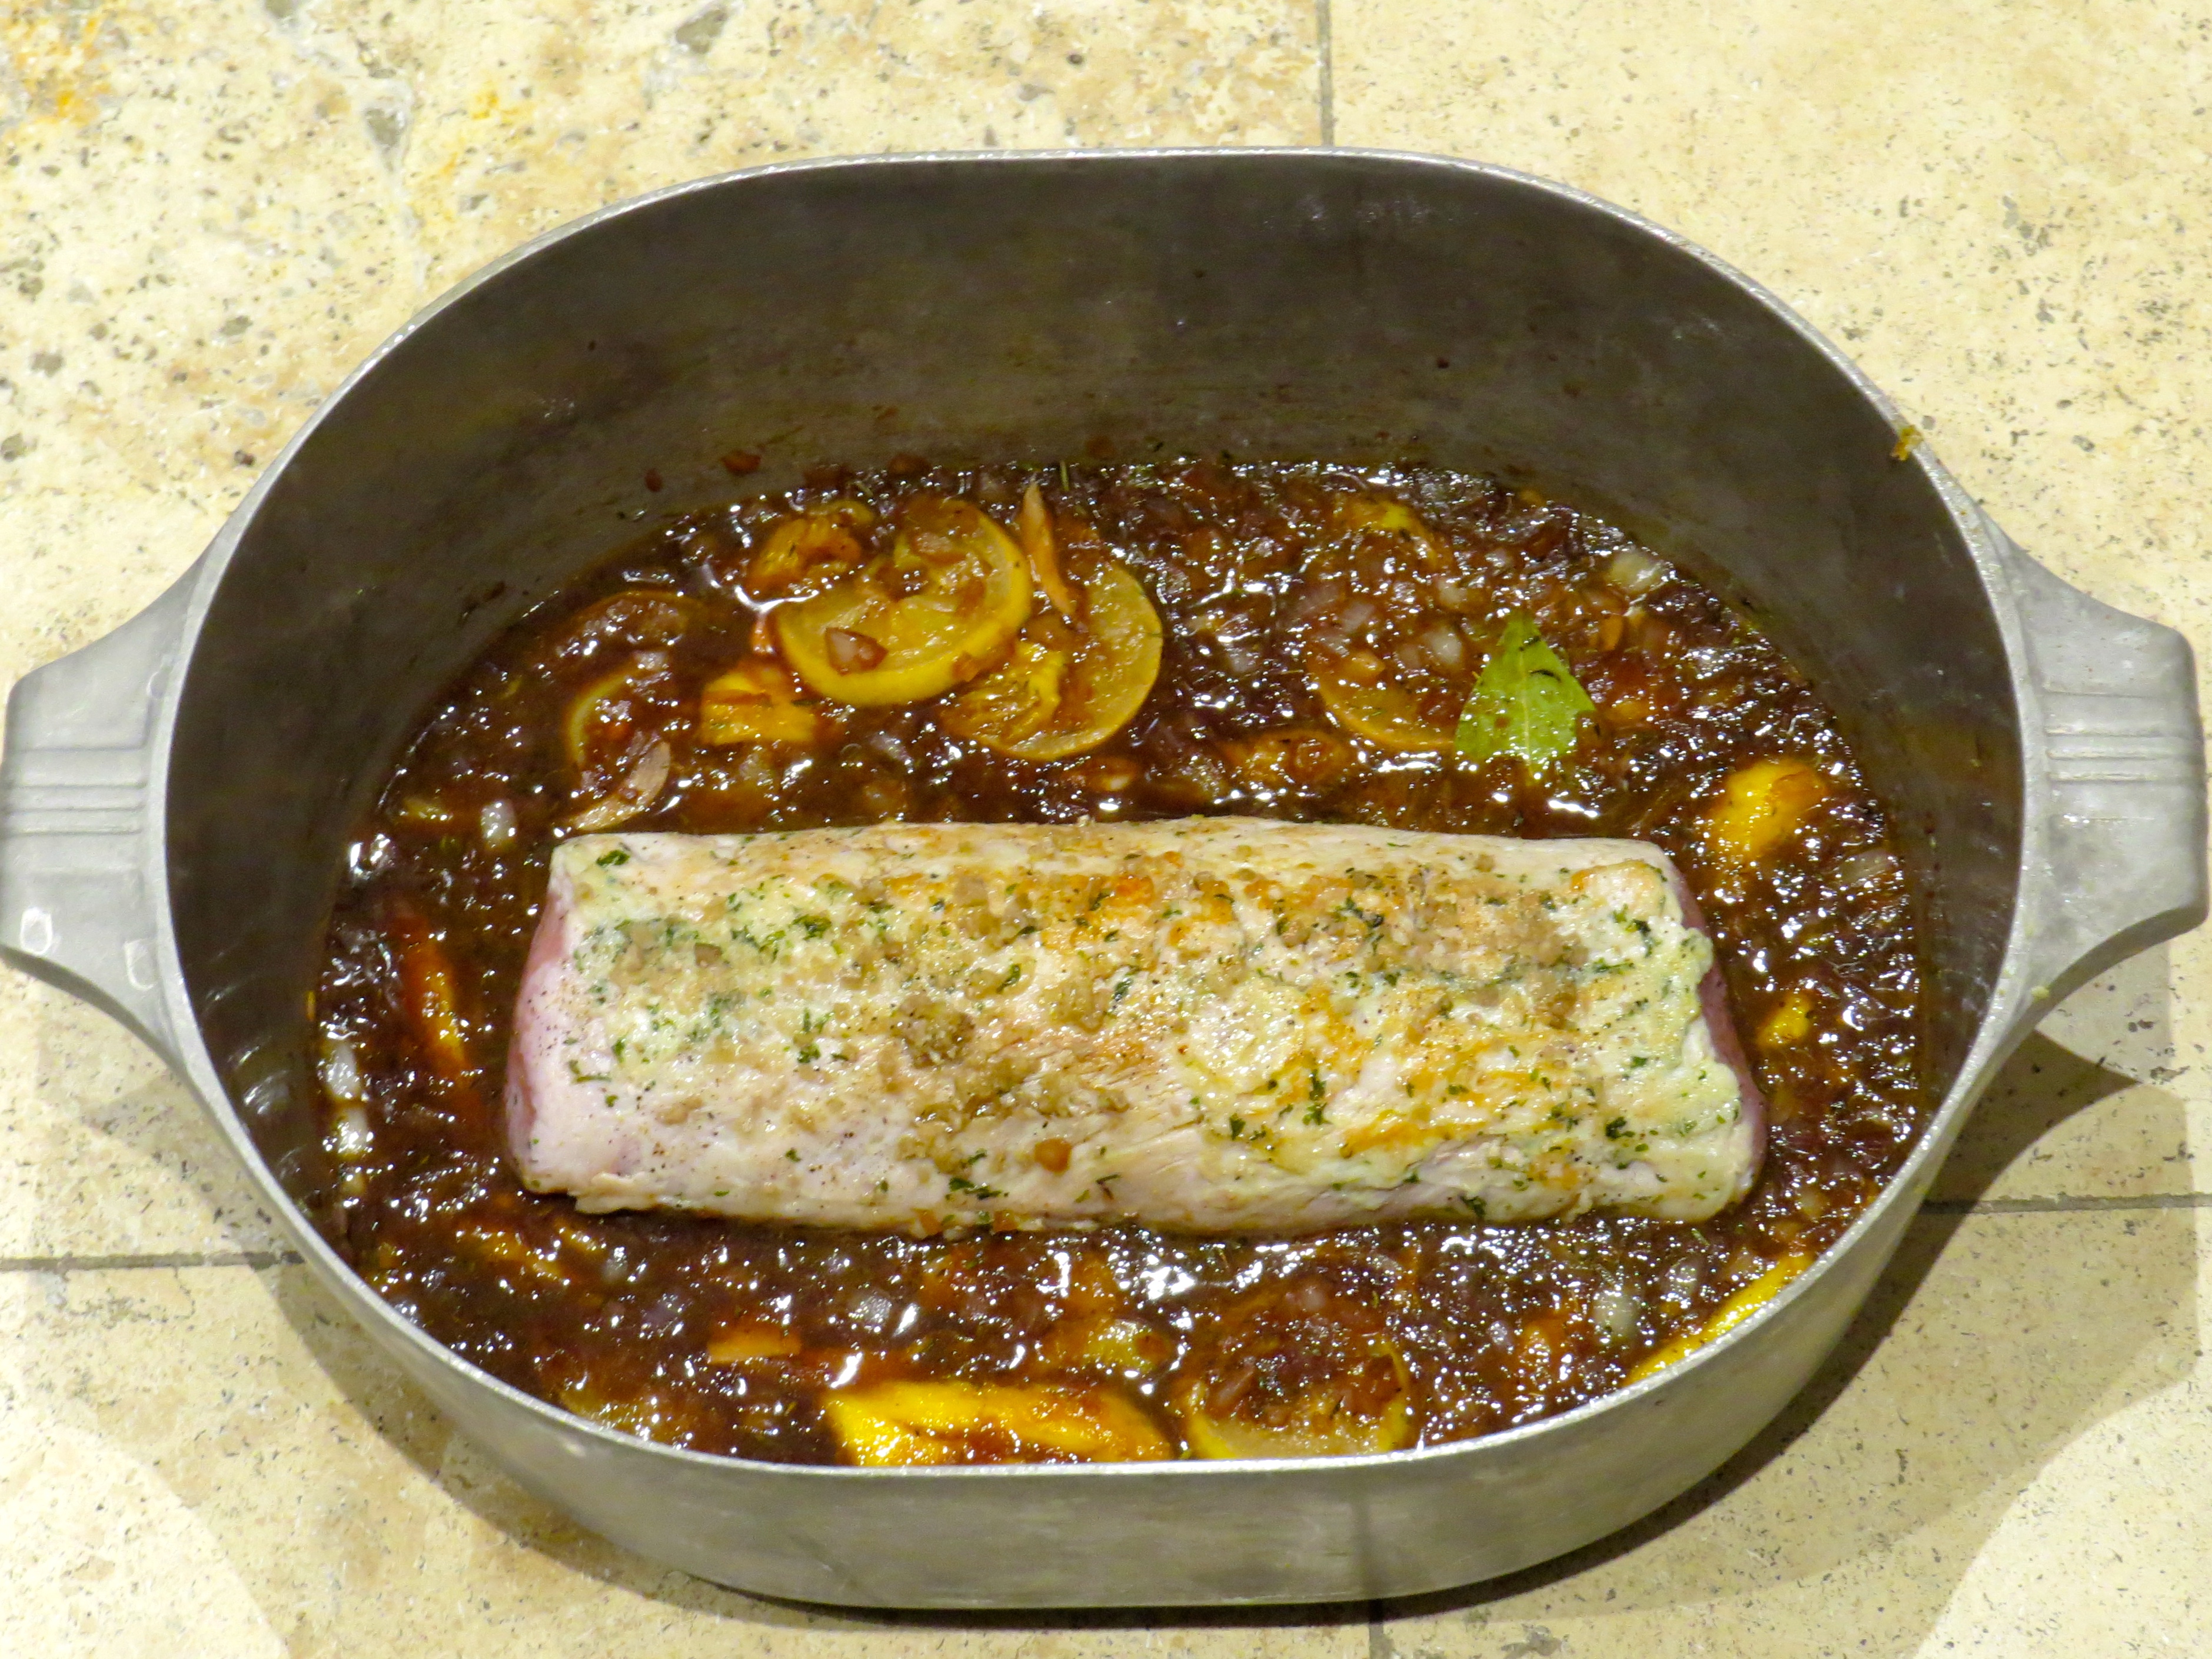 The pork and added ingredients are ready to go into the oven for its final braise.